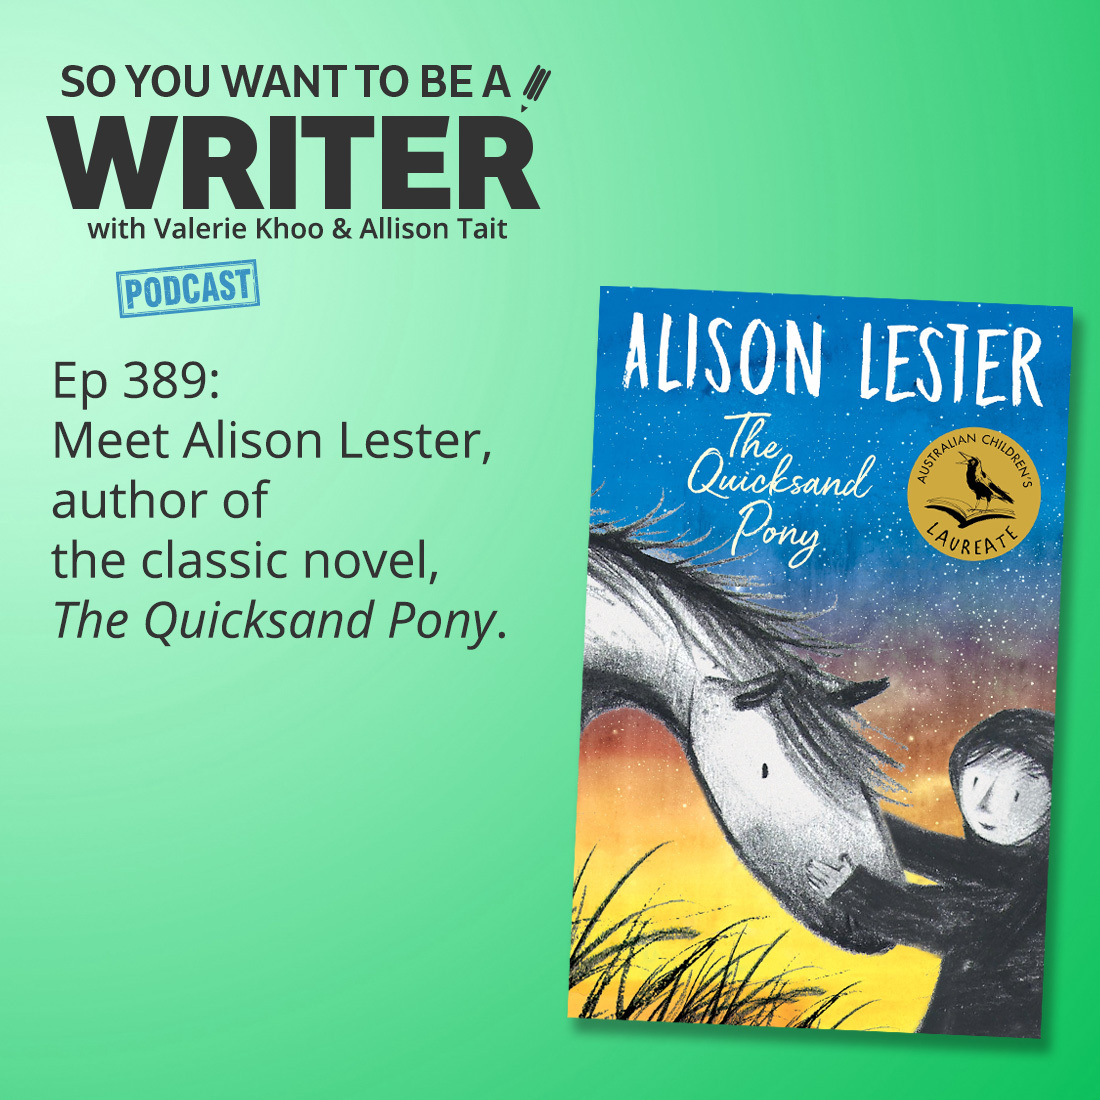 WRITER 389: Meet Alison Lester, author of the classic novel, 'The Quicksand Pony'.